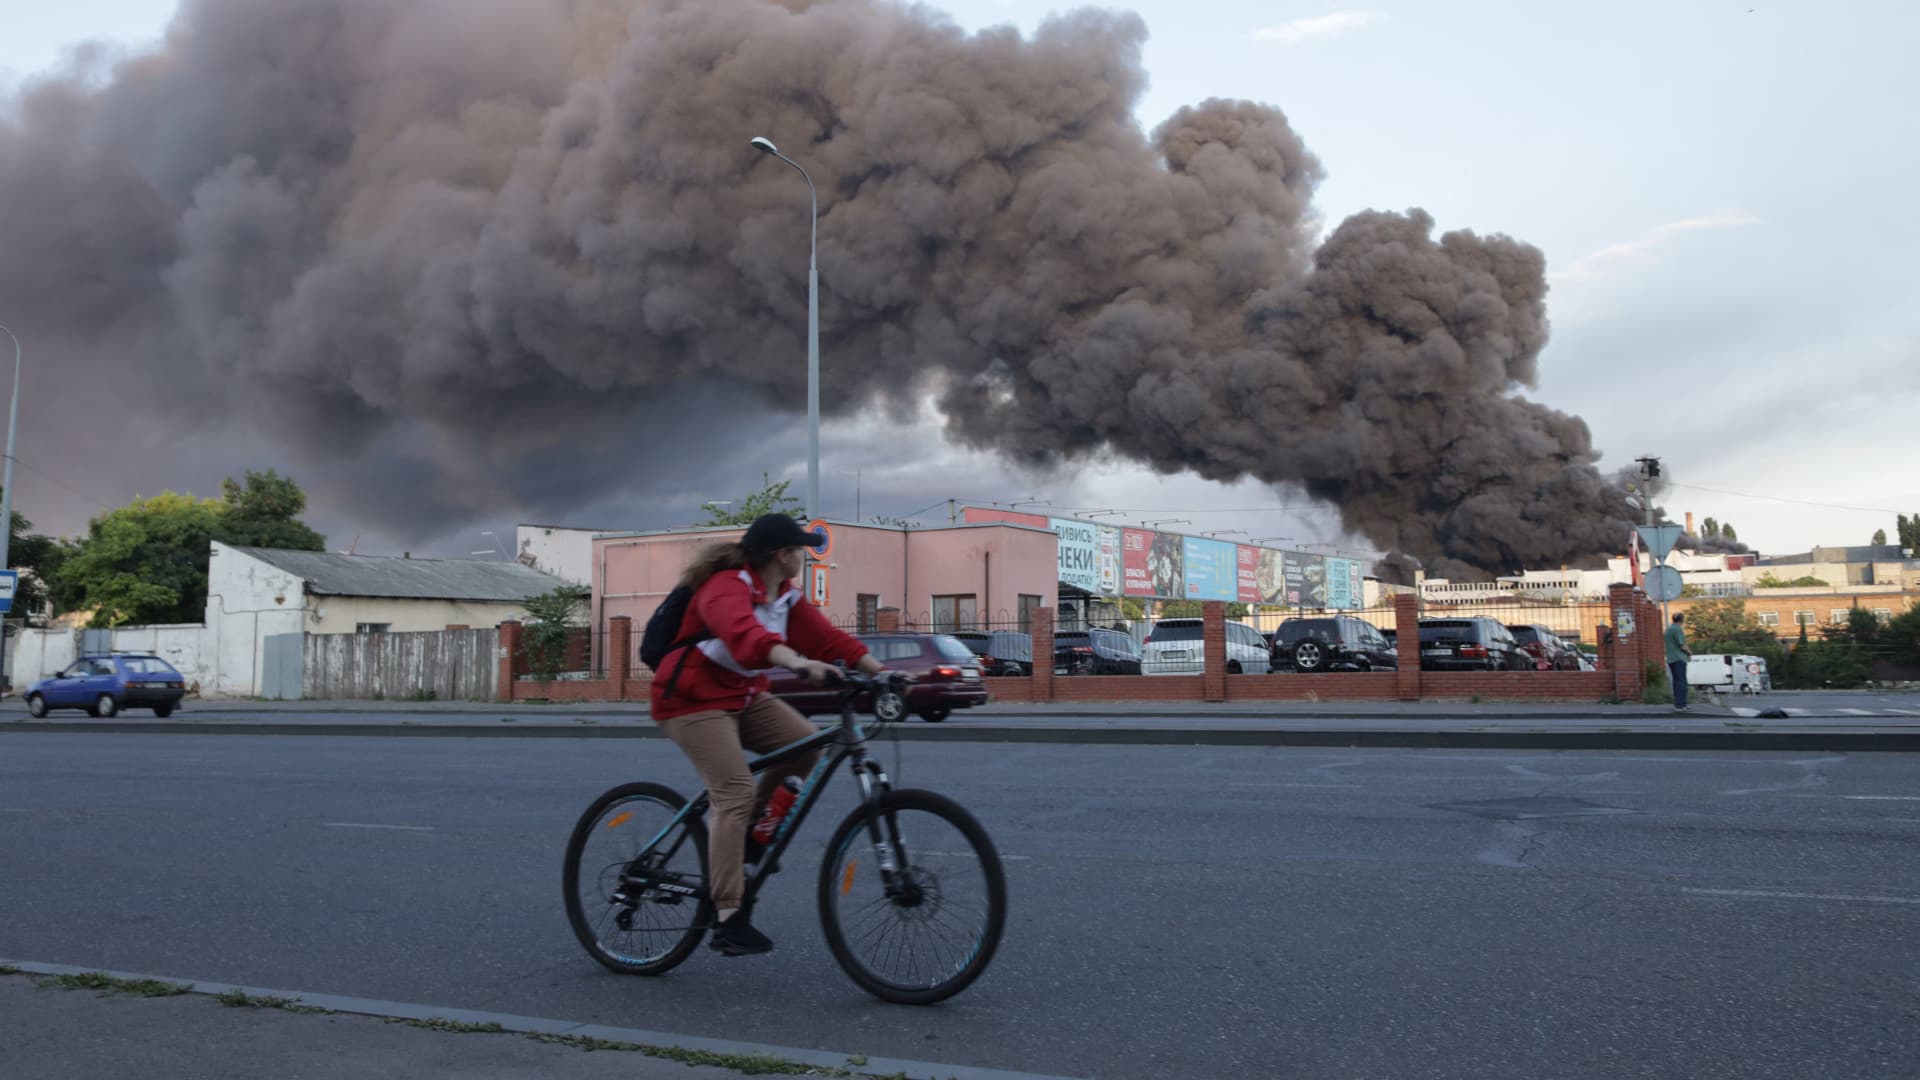 A woman rides a bicycle past a cloud of smoke from a fire in the background, after a missile strike on a warehouse of an industrial and trading company in Odesa on July 16, 2022.